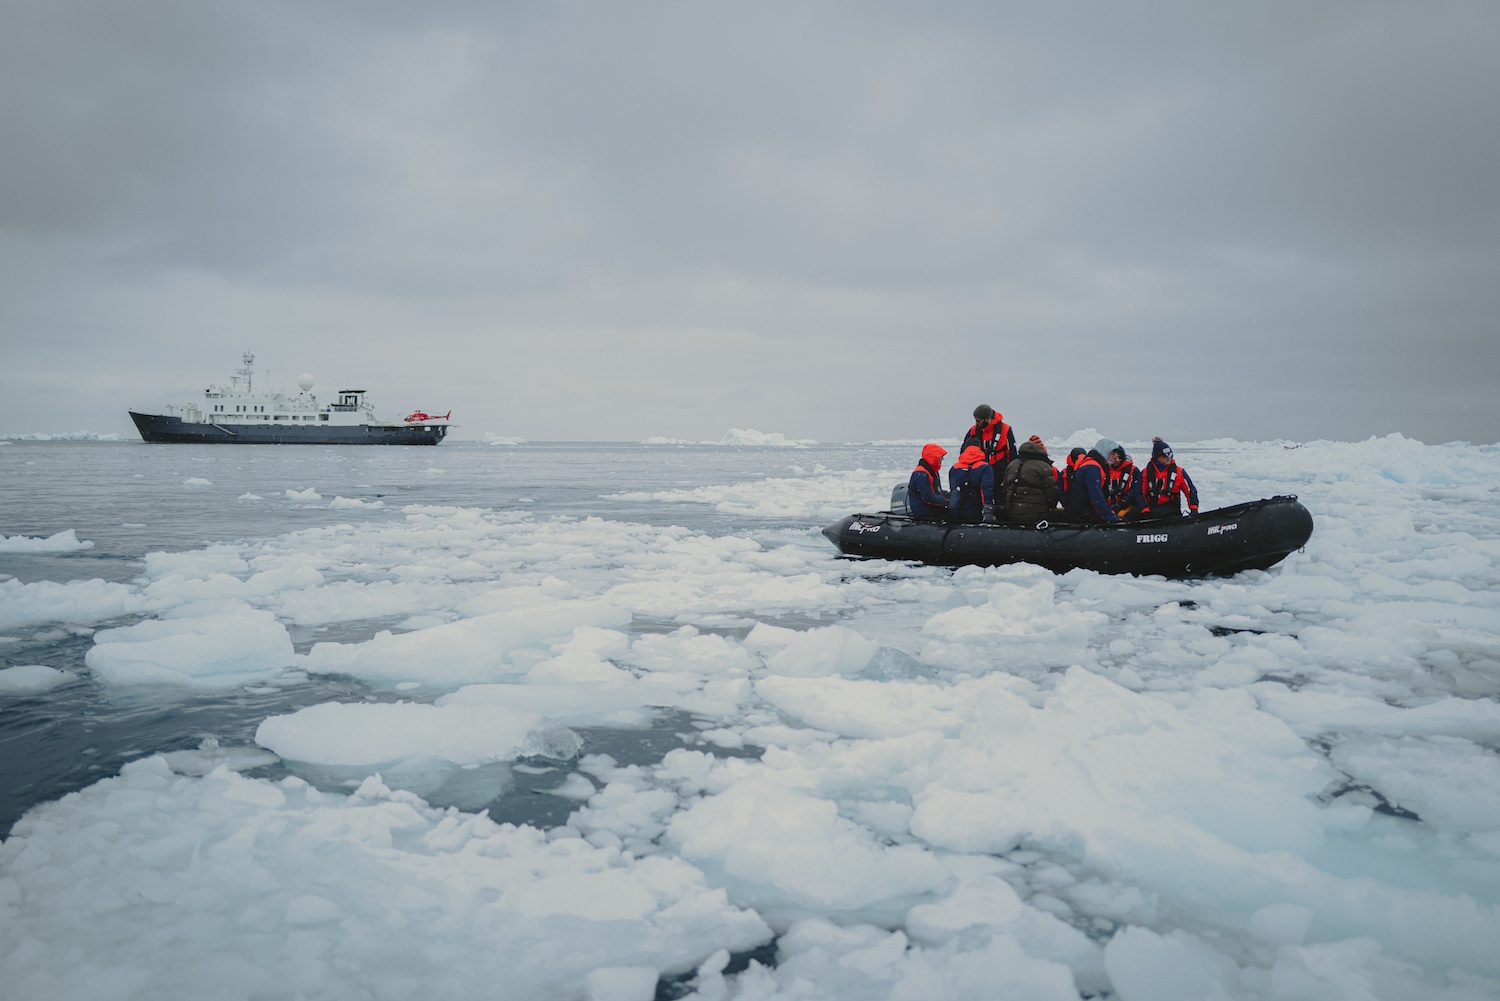 Exploring the ice on baffin bay